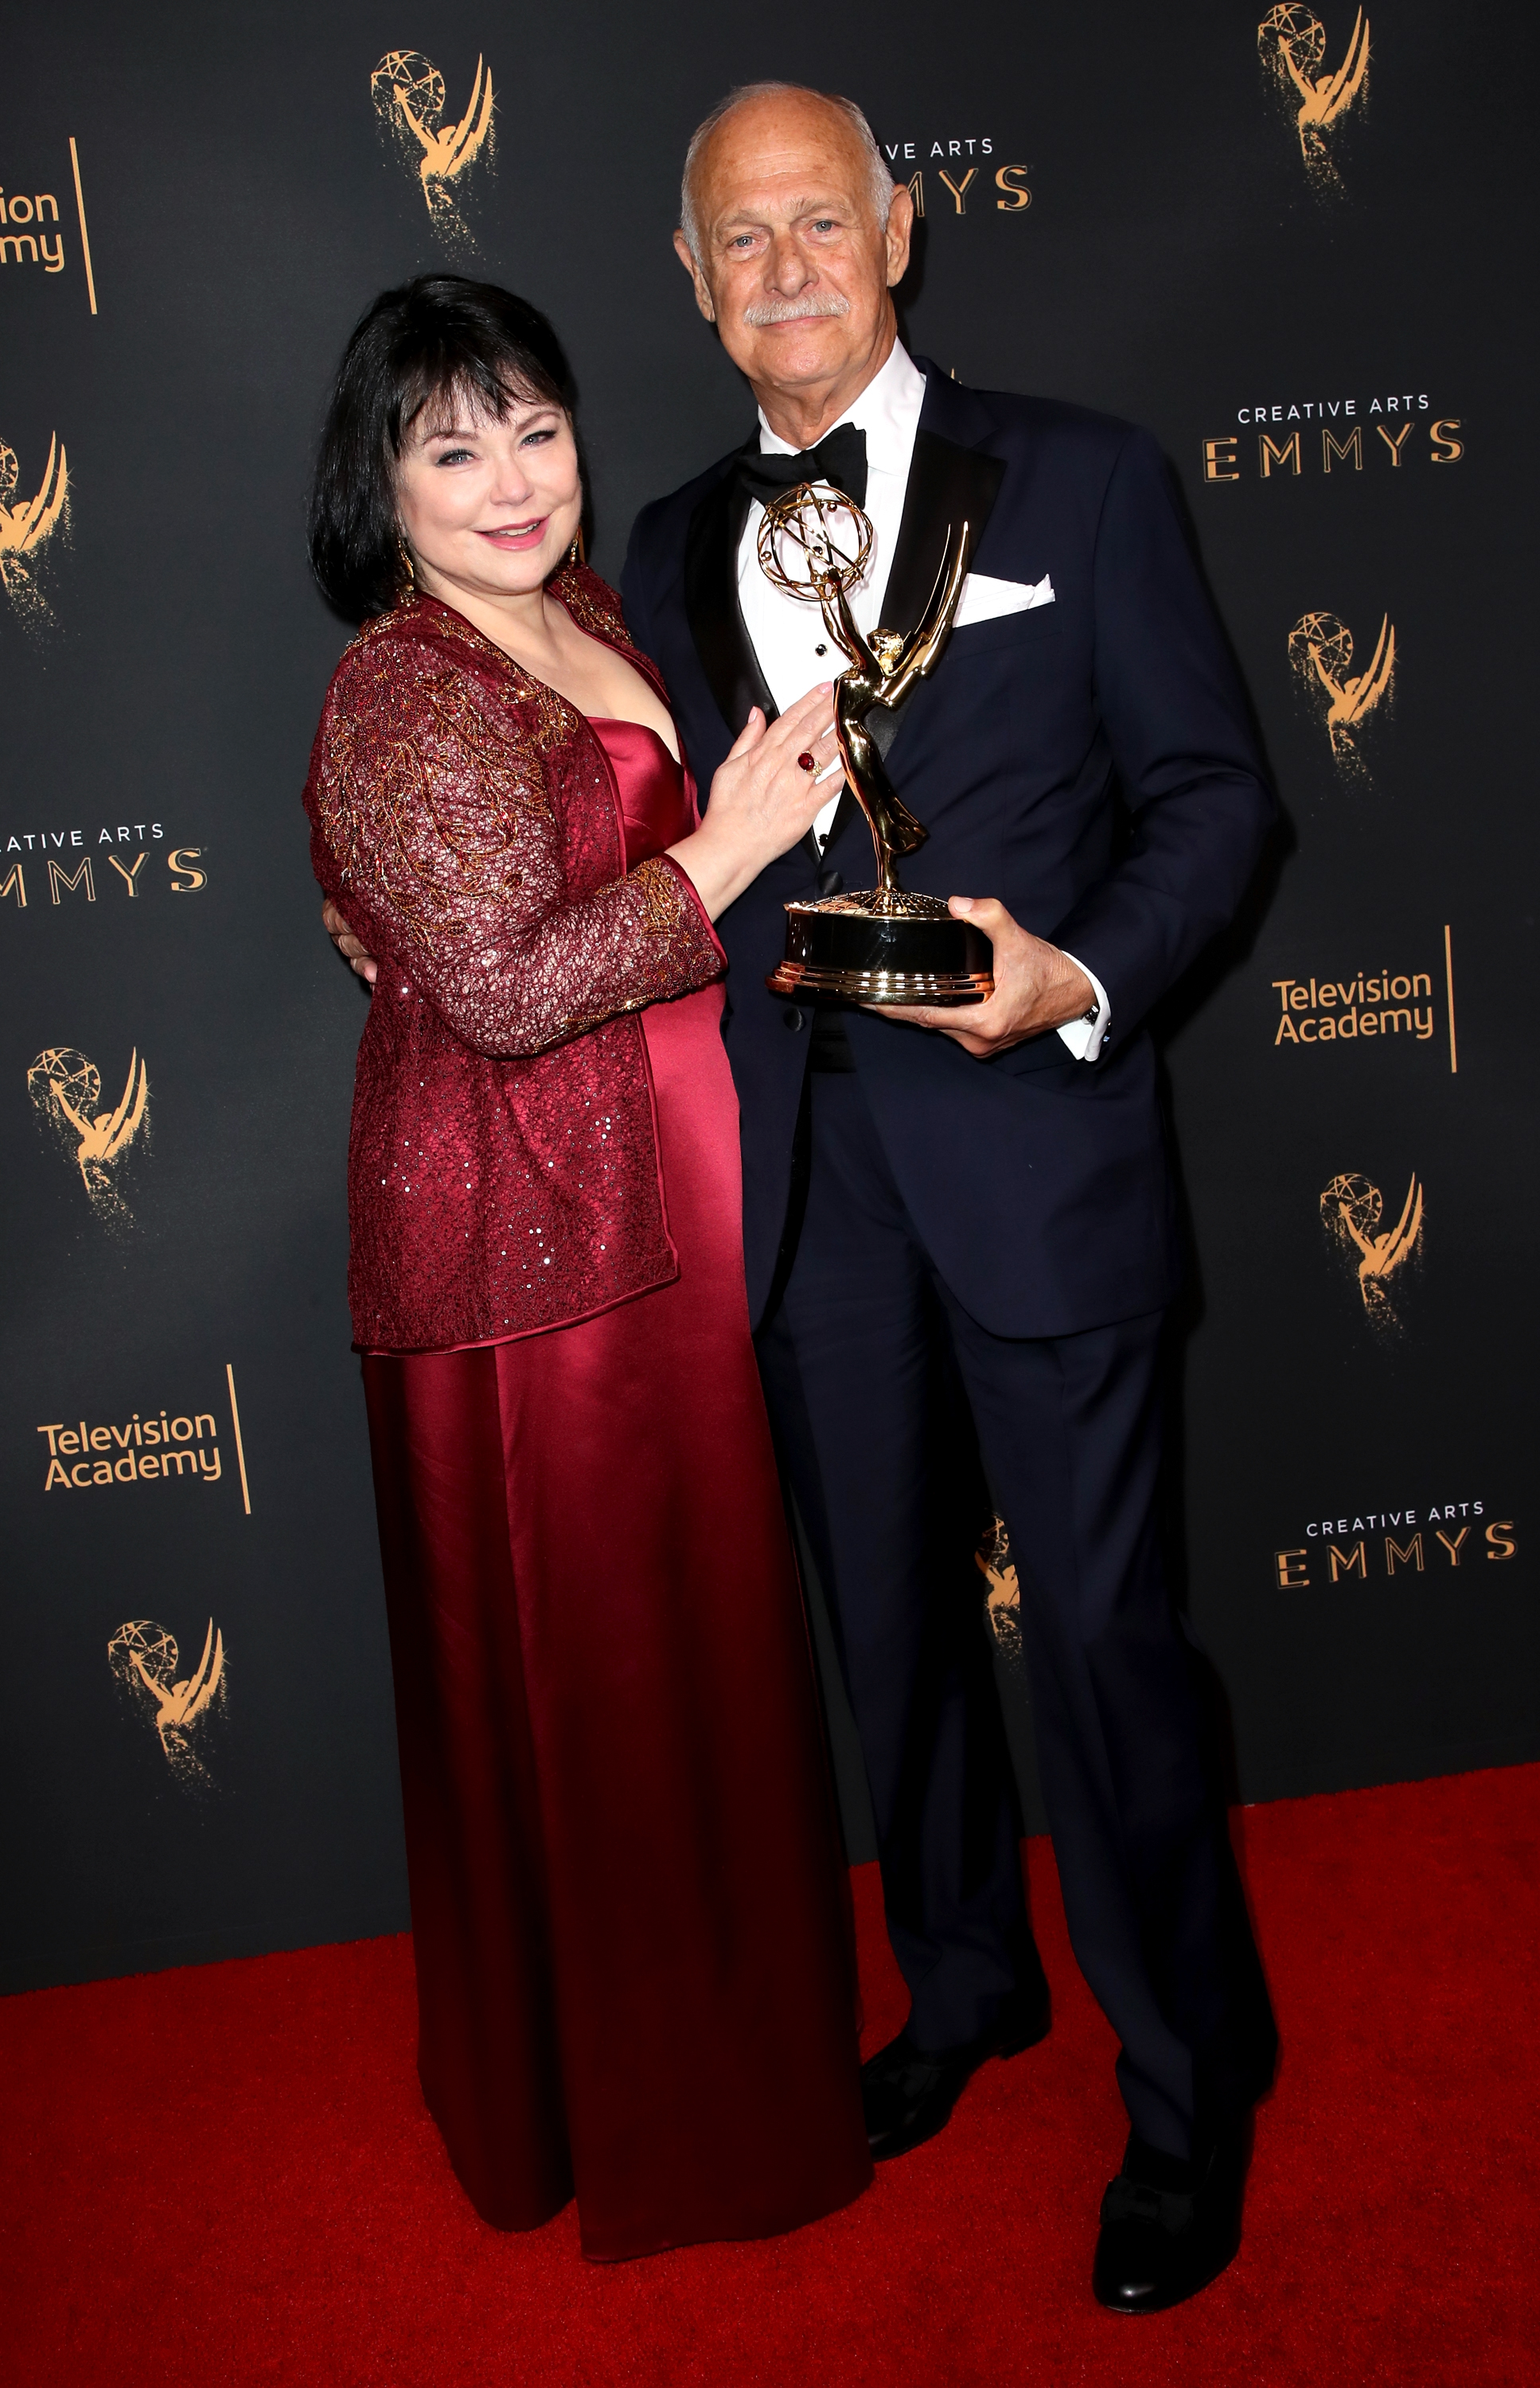 Delta Burke and Gerald McRaney at the 2017 Creative Arts Emmy Awards at Microsoft Theater on September 10, 2017 in Los Angeles, California | Source: Getty Images